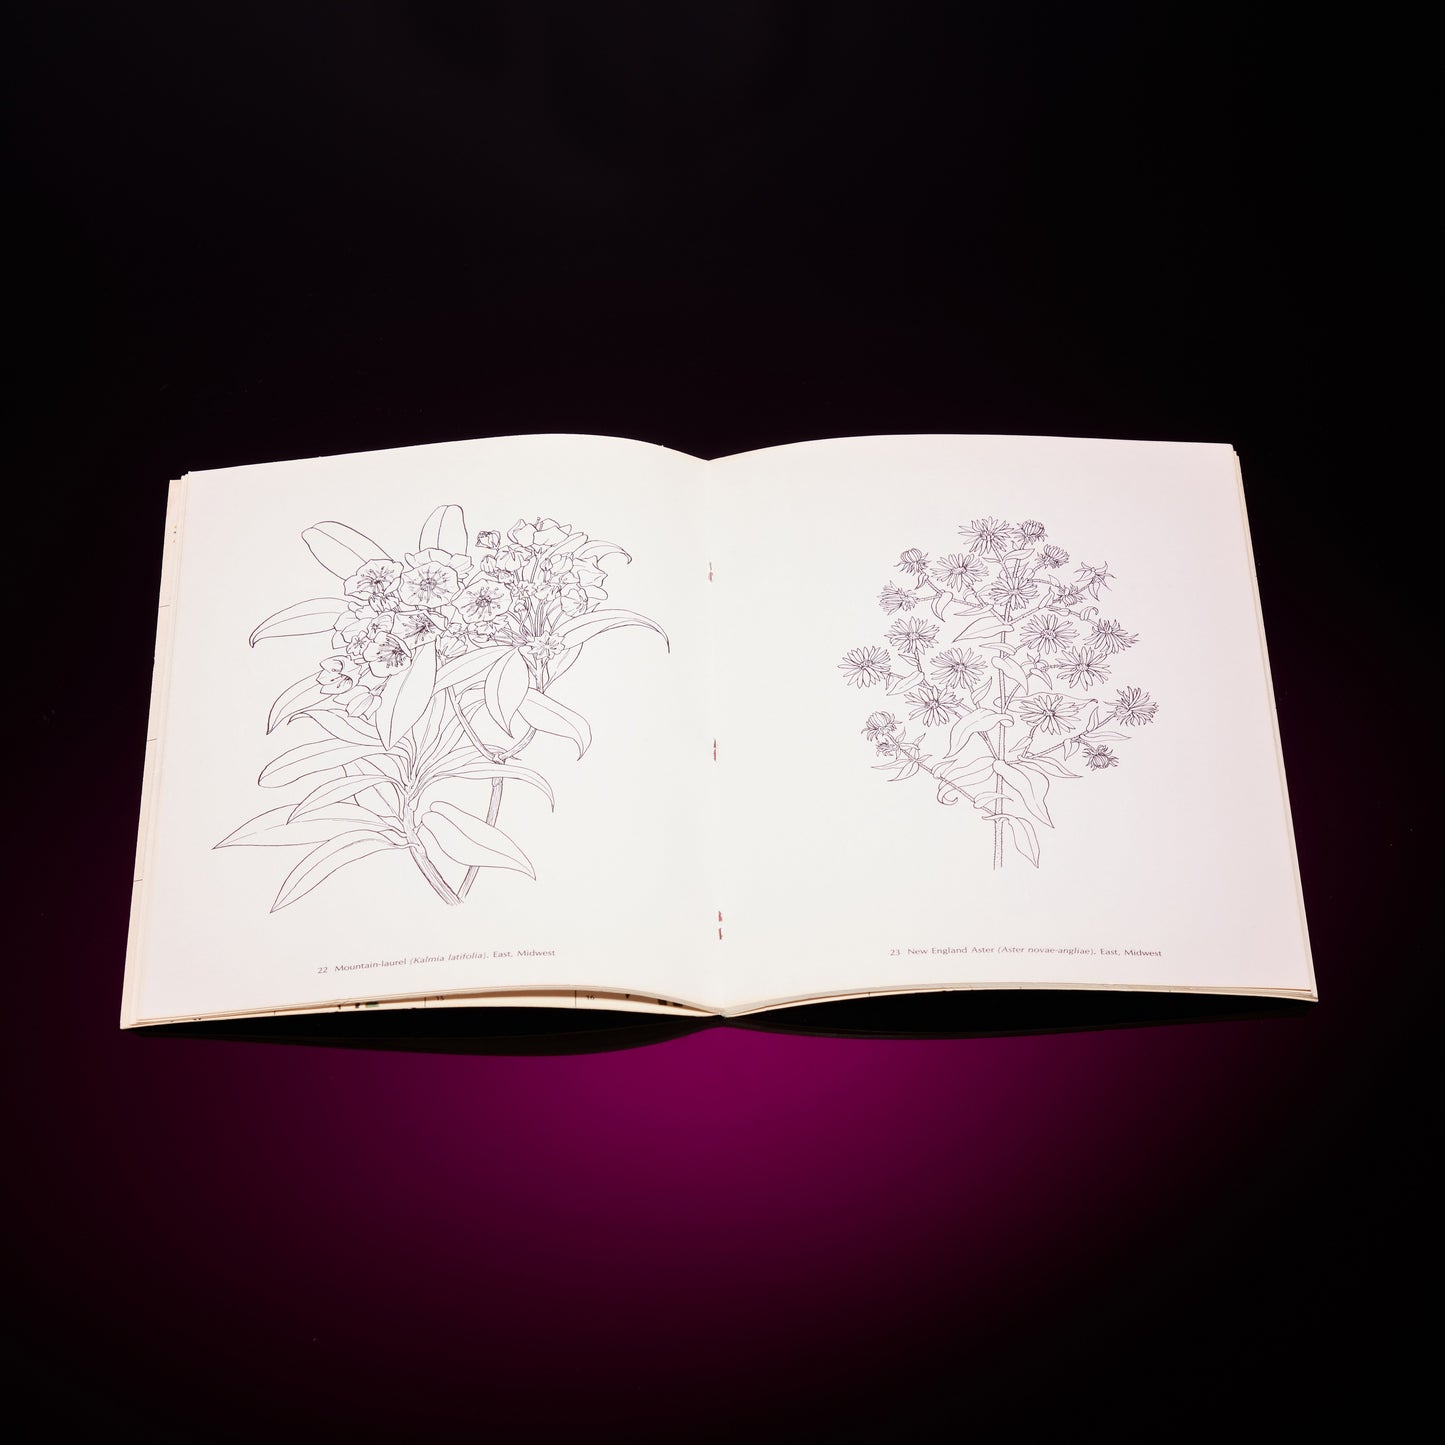 AMERICAN WILD FLOWERS COLORING BOOK